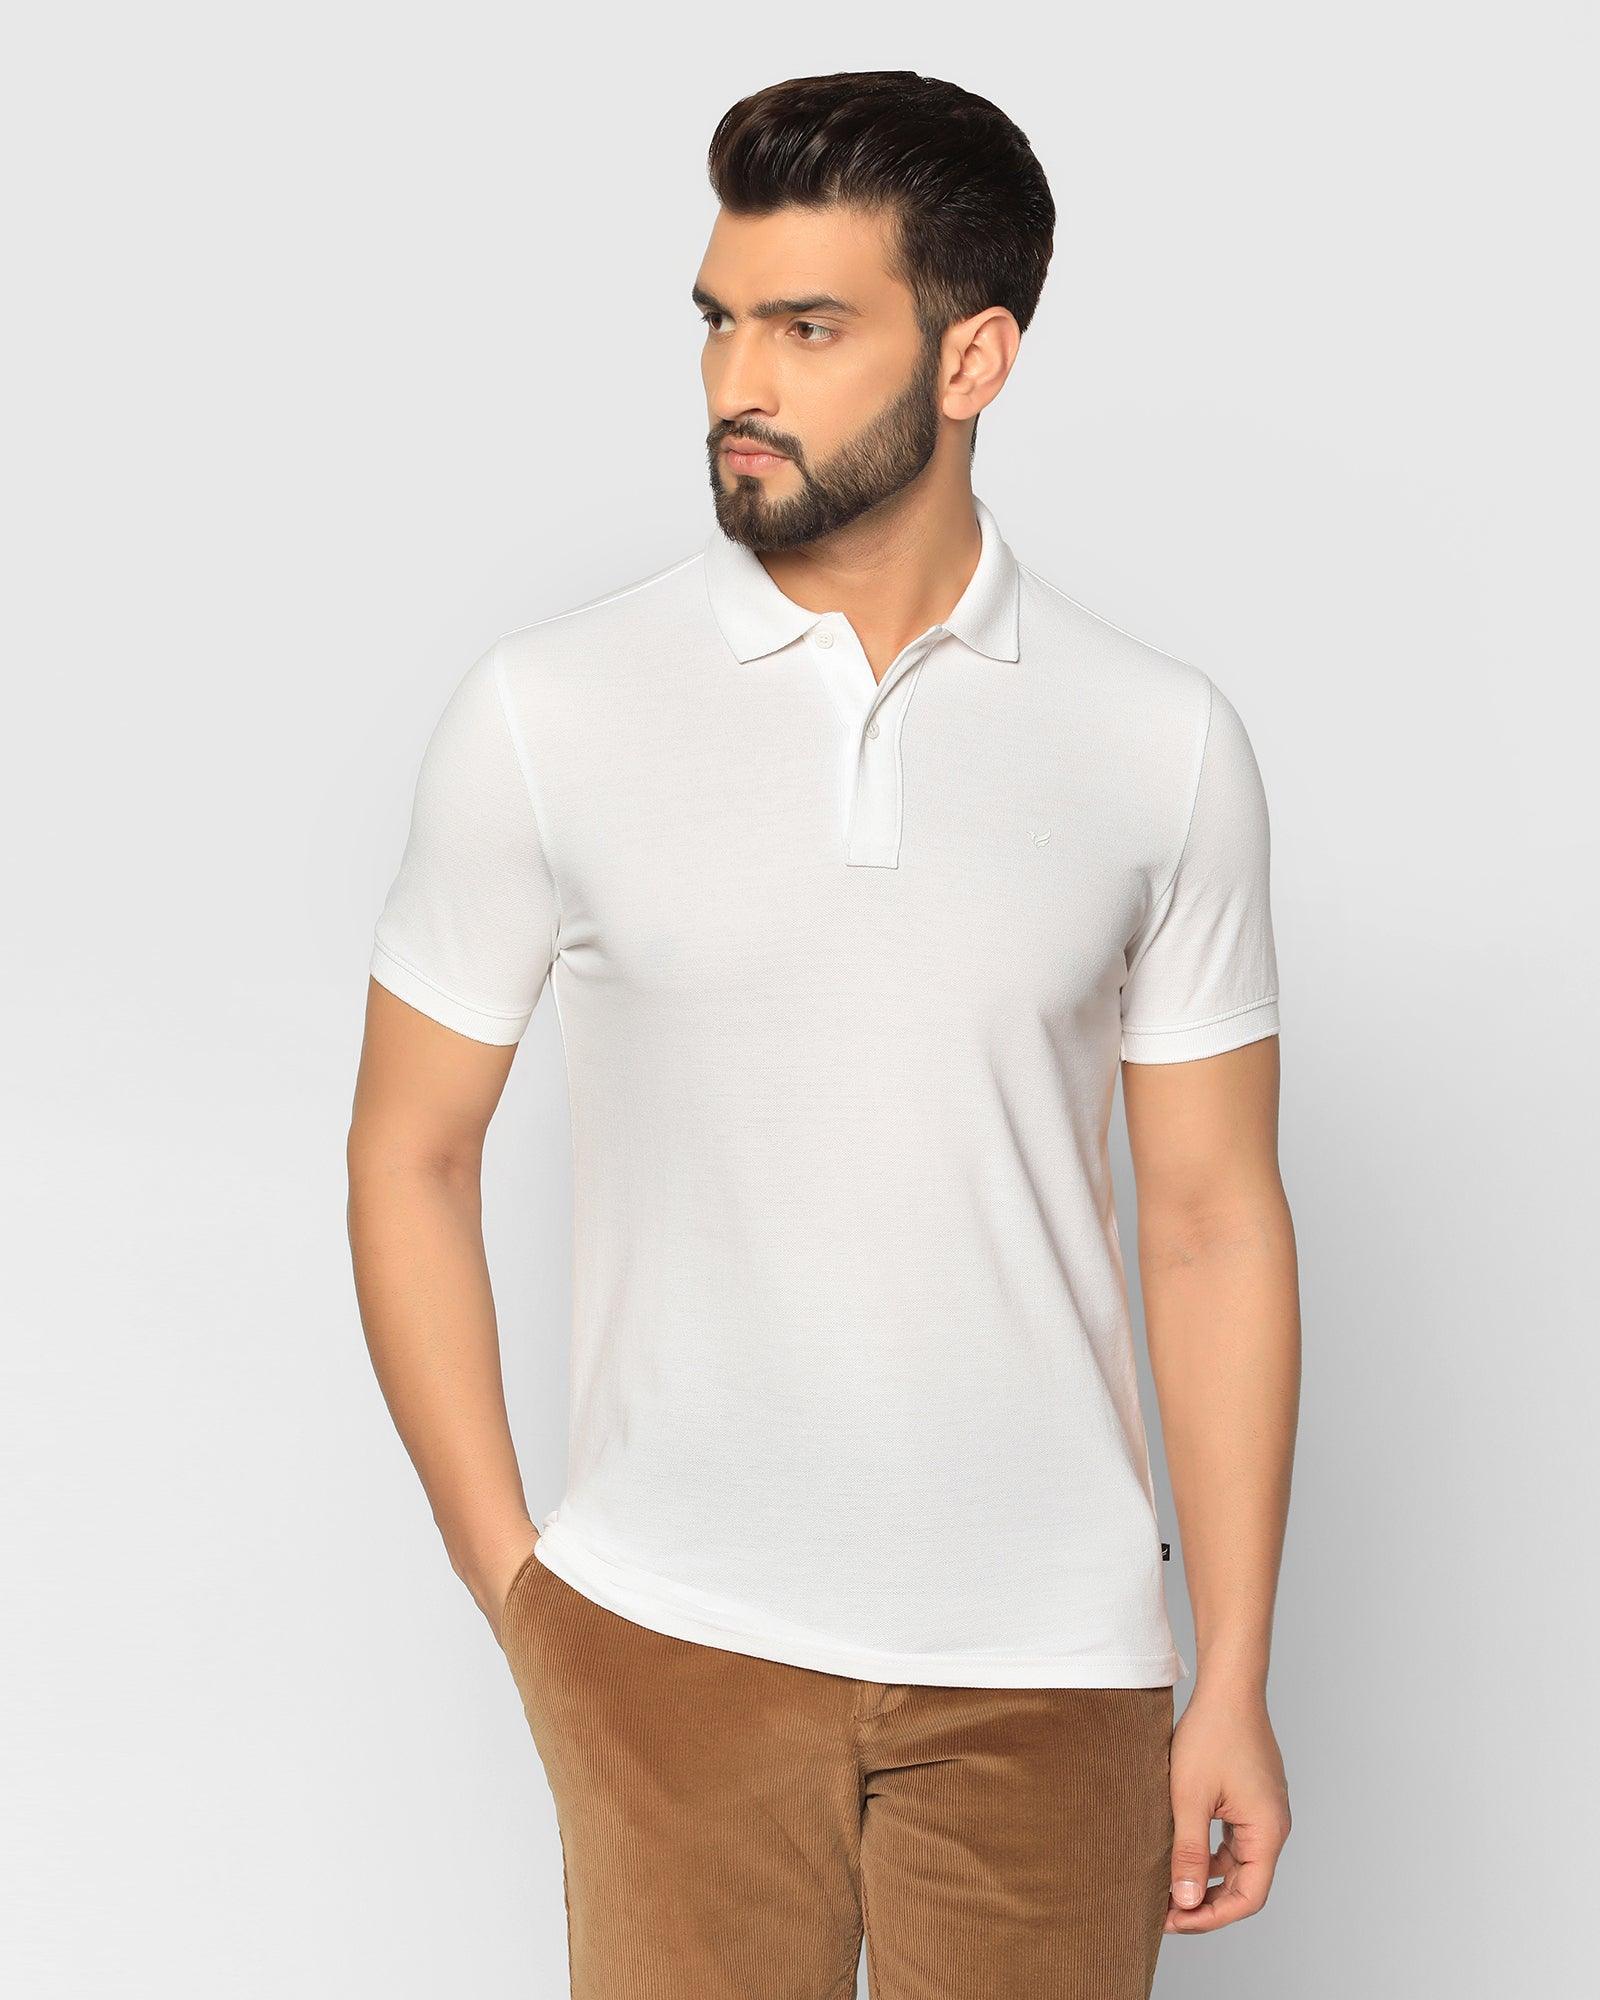 Polo White Solid T Shirt - Bright